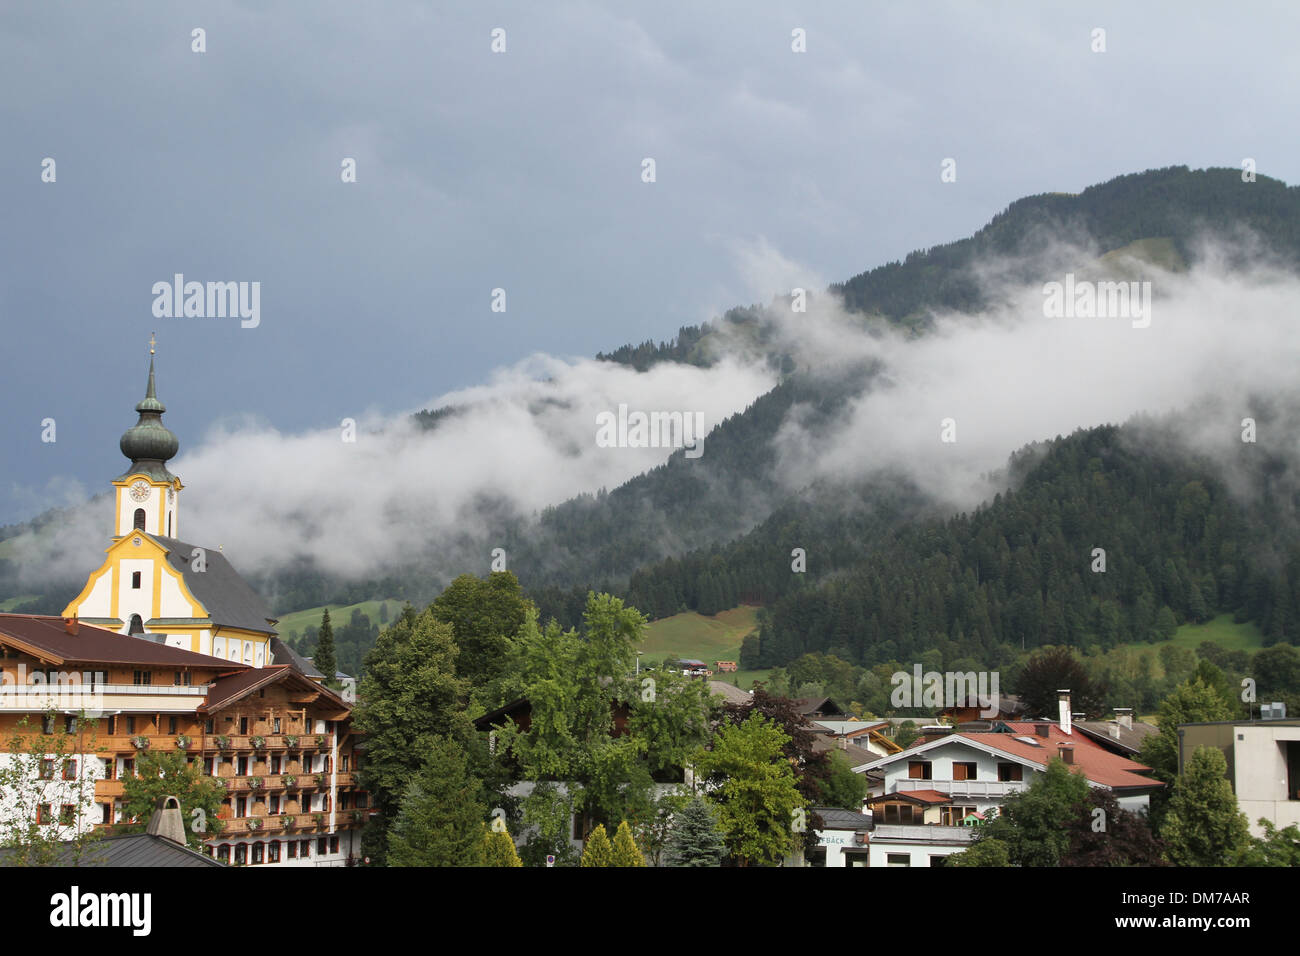 Clouds low over the mountain in Soll, Austria Stock Photo